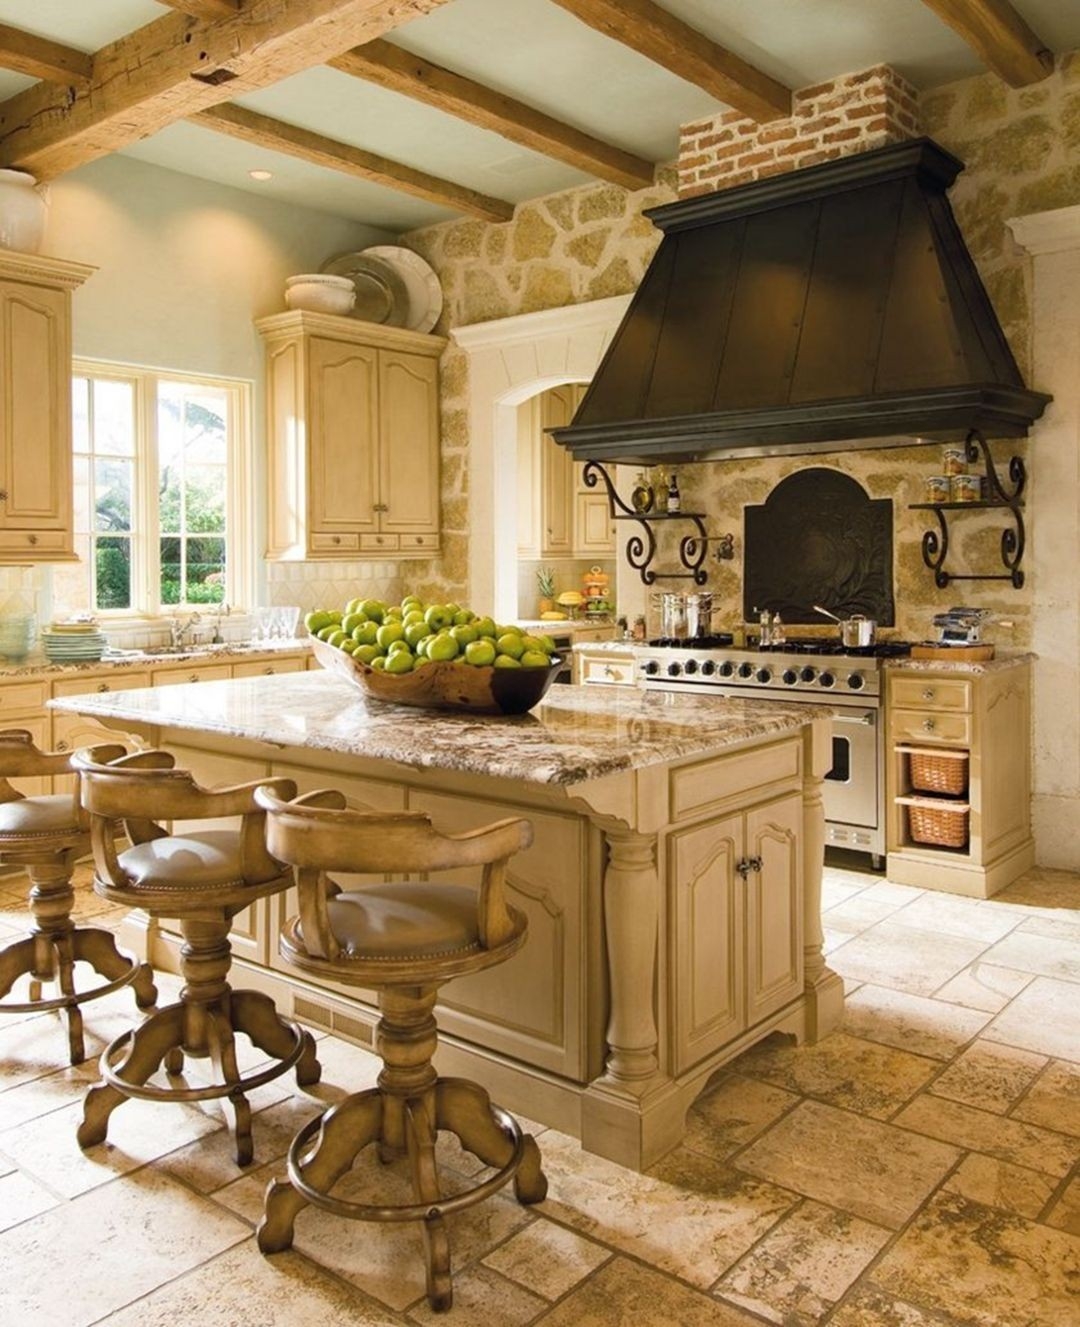 https://visualhunt.com/photos/10/20-ways-to-create-a-french-country-kitchen.jpg